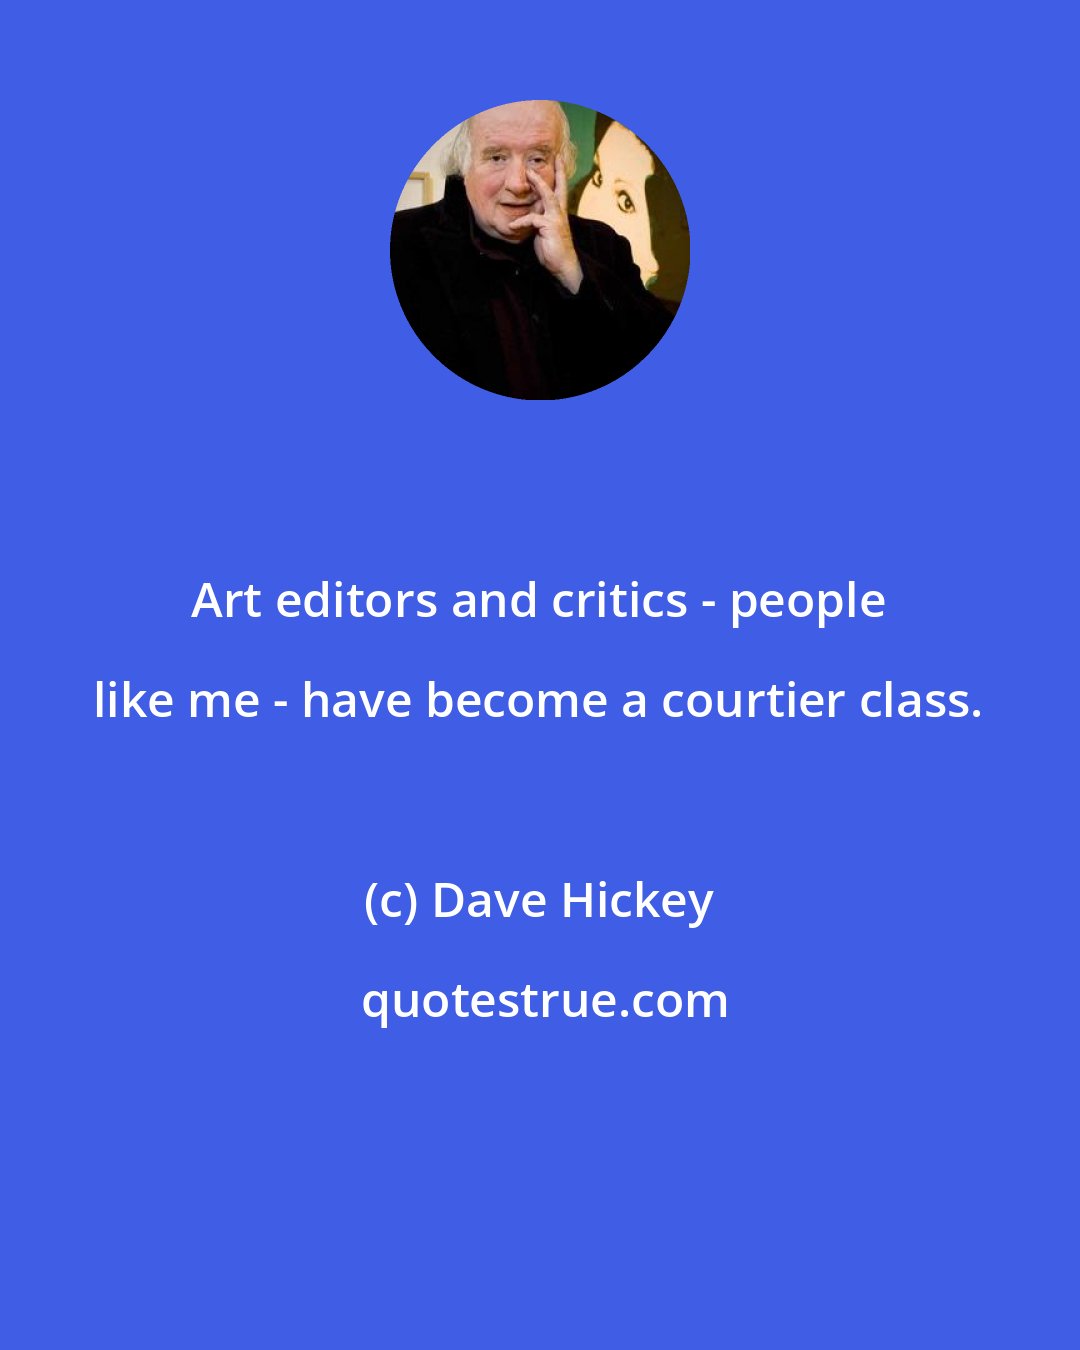 Dave Hickey: Art editors and critics - people like me - have become a courtier class.